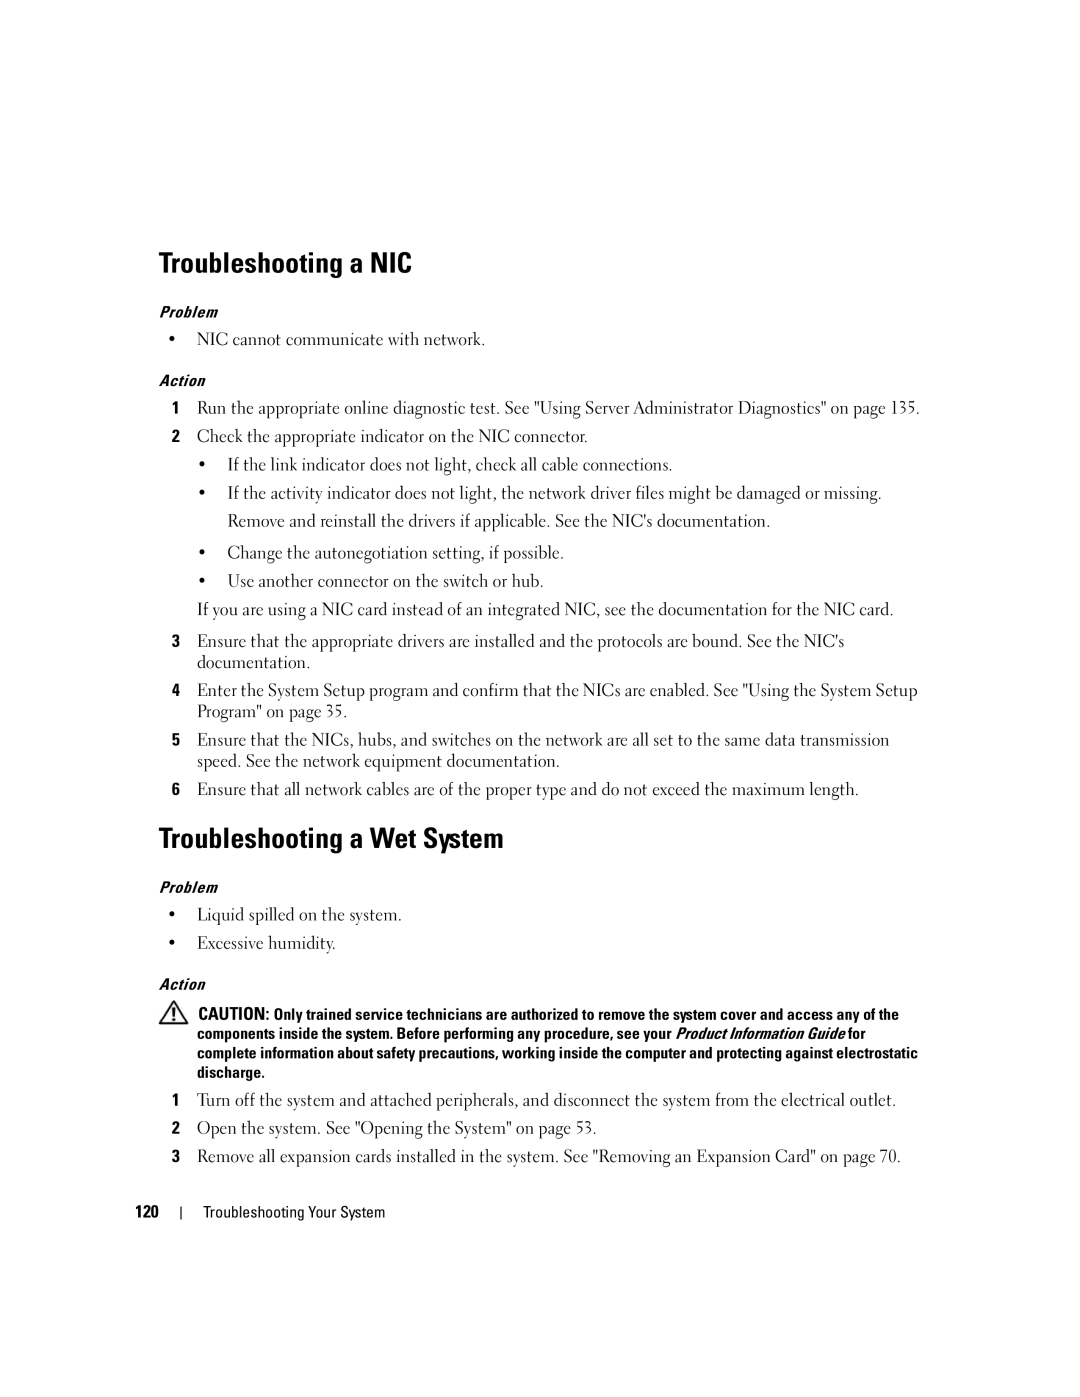 Dell 2900 owner manual Troubleshooting a NIC, Troubleshooting a Wet System 